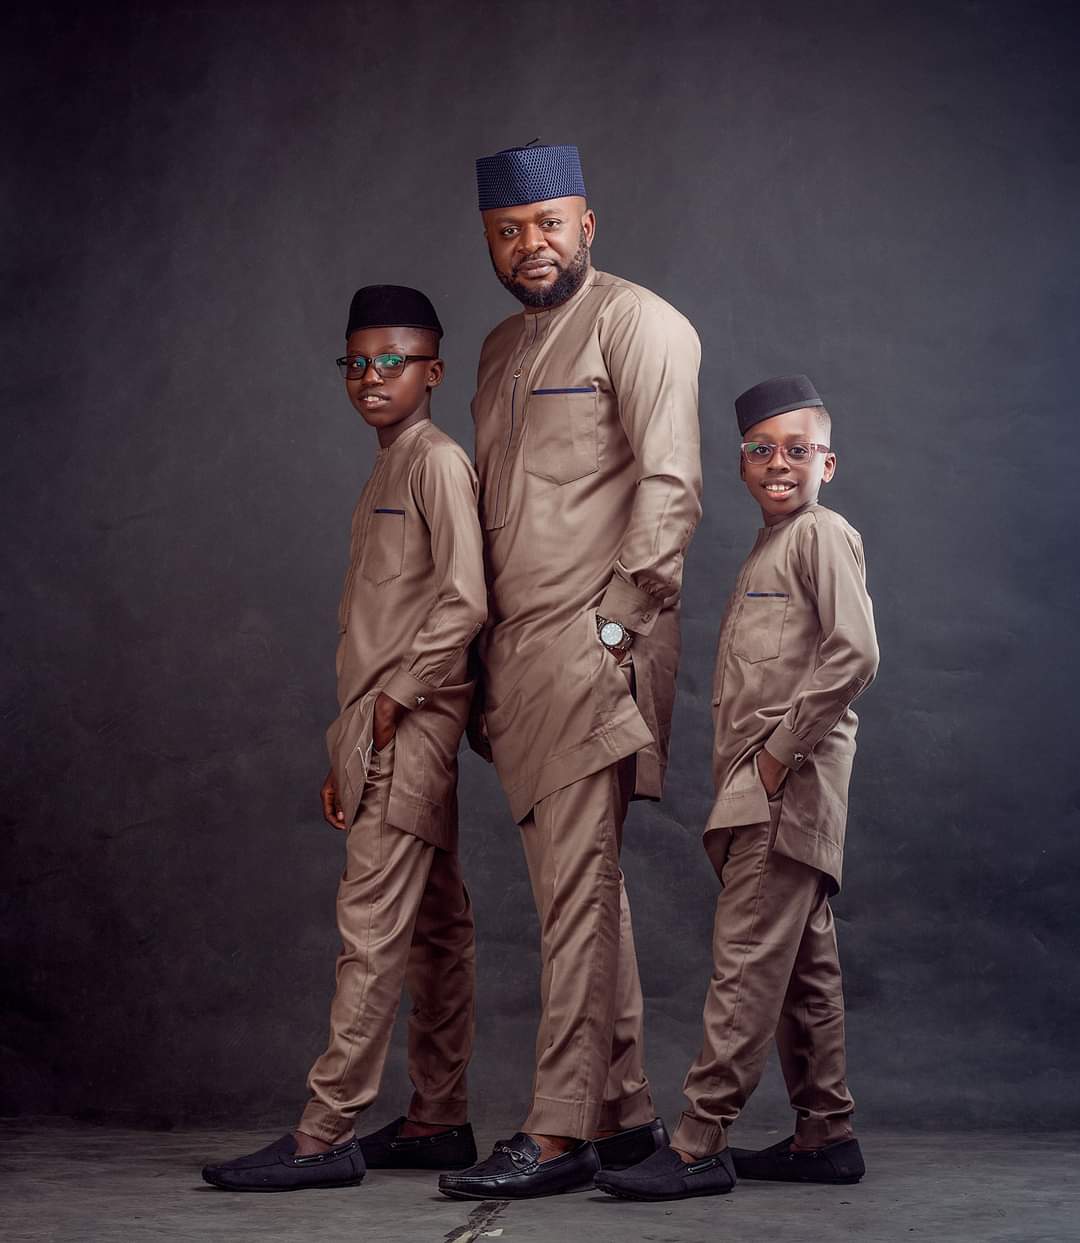 Allison DImgba and his sons, married to Vivian Dimgba